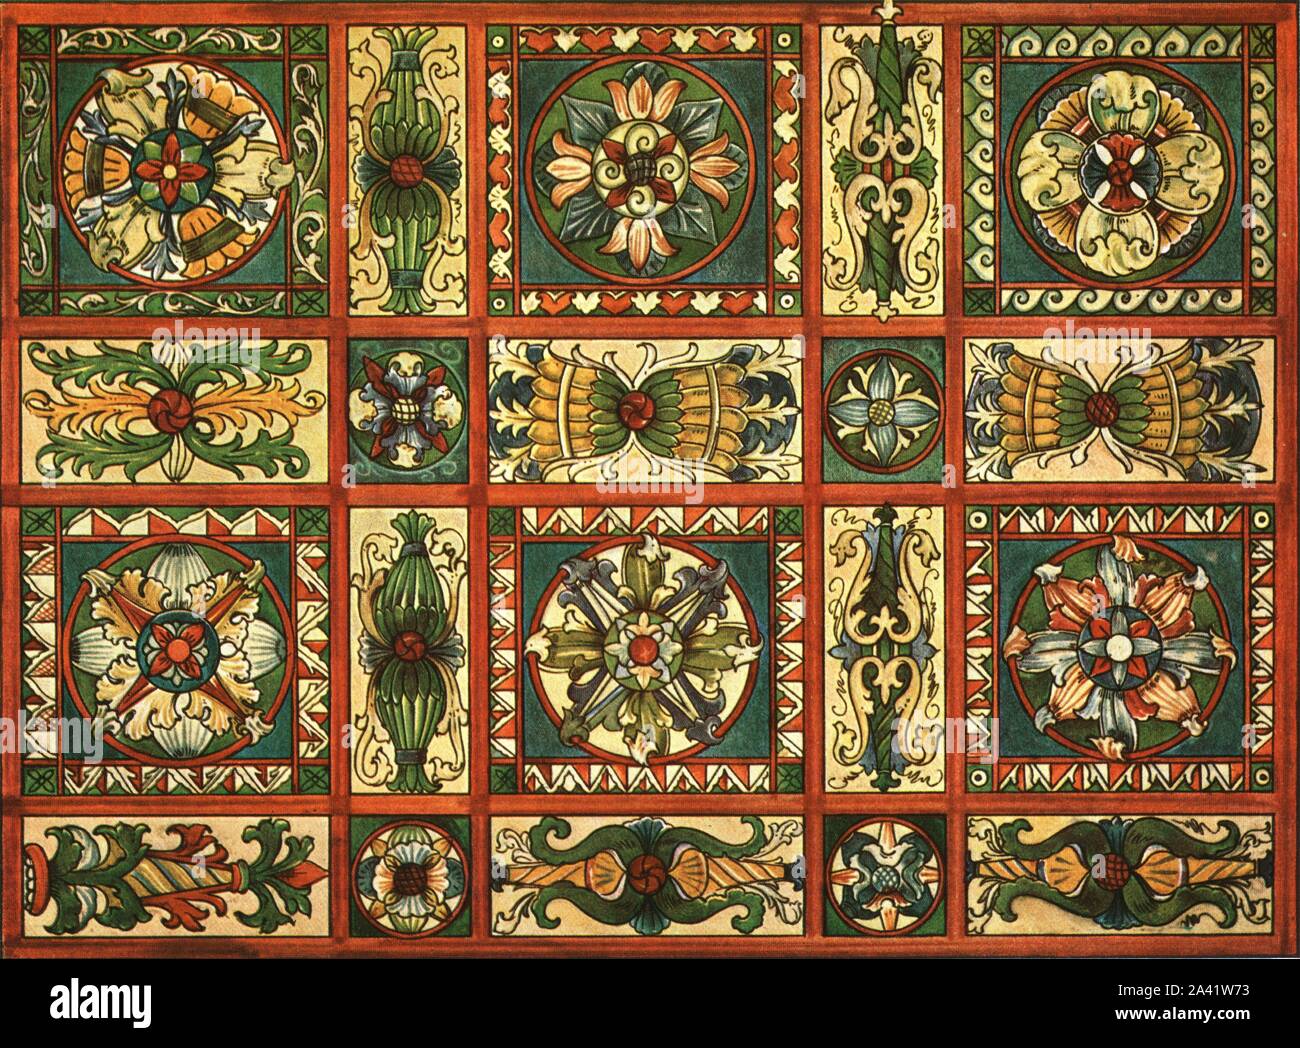 Decoration in St Valentine's Church, Chechlau, (1928). '2nd Quarter of 16th Century...Detail of a painted ceiling in the nave of St. Valentine's at Chechlau [Chechlo], (Silesia)'. After R. Borrmann. Plate LXXXVII, fig 177, from &quot;An Encyclopaedia of Colour Decoration from the Earliest Times to the Middle of the XIXth Century&quot; with explanatory text by Helmuth Bossert. [Ernst Wasmuth Ltd., Berlin, 1928] Stock Photo